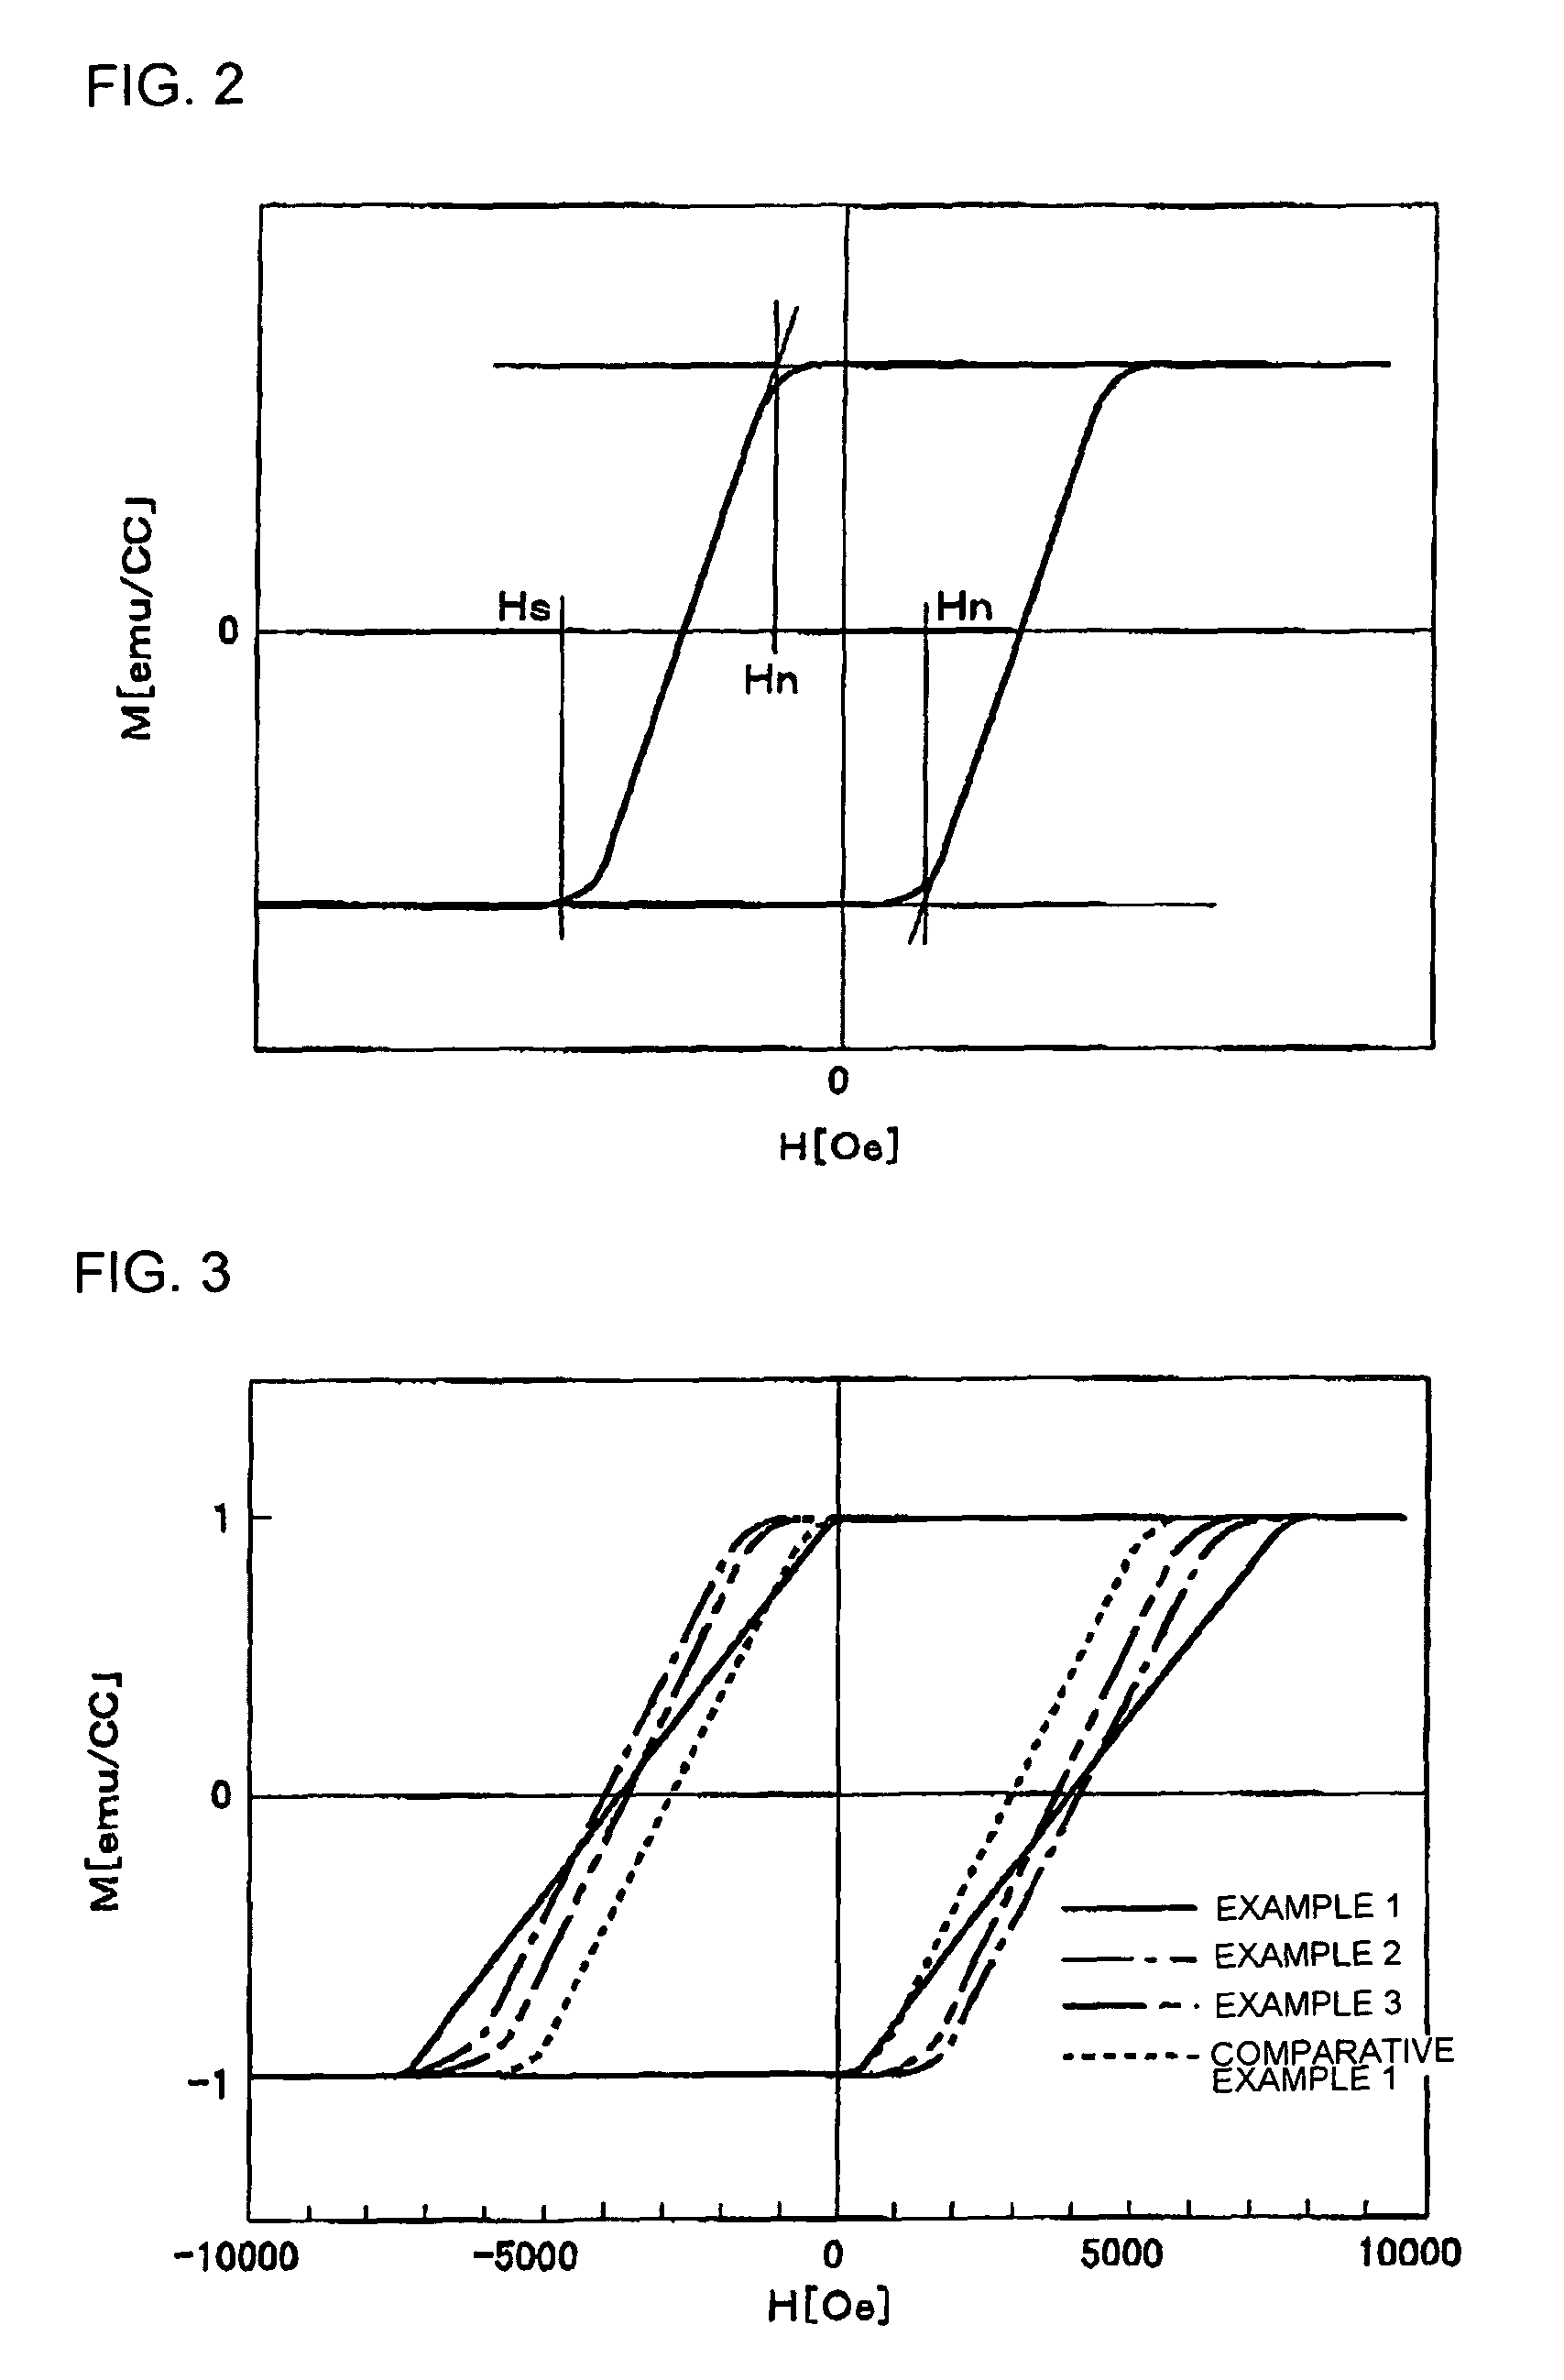 Perpendicular magnetic recording disk and manufacturing method thereof